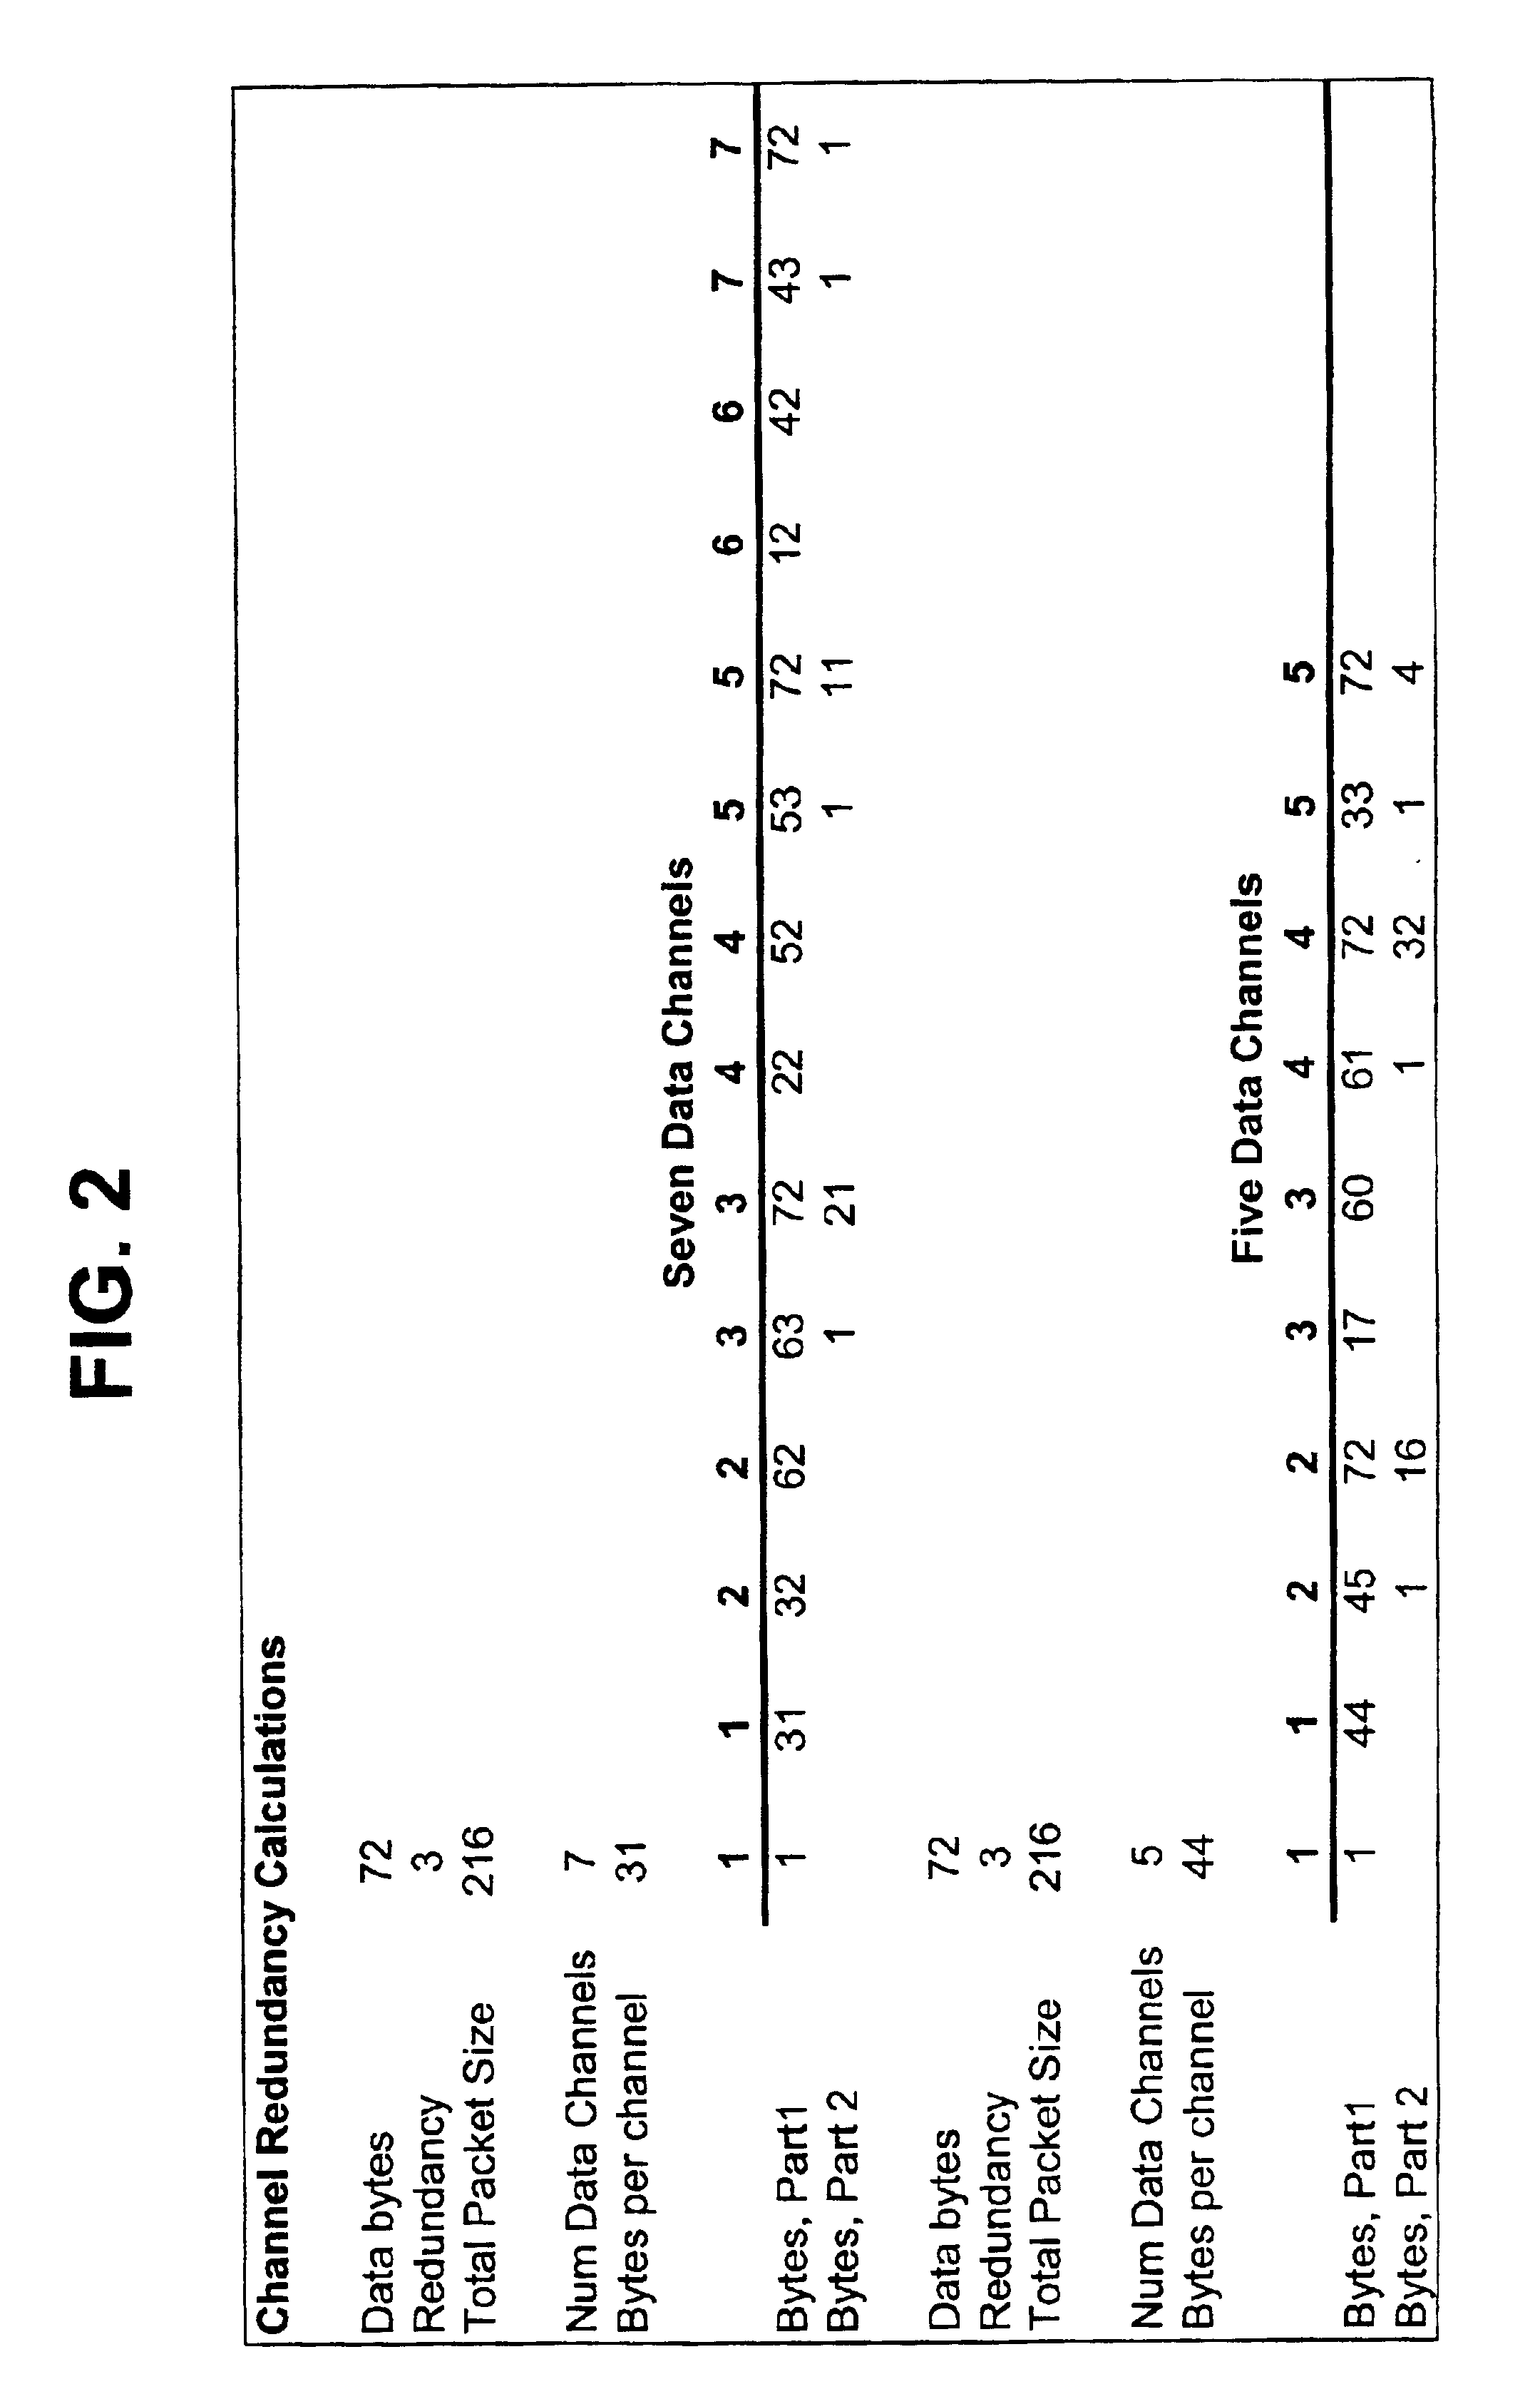 Frequency hopping spread spectrum communications system